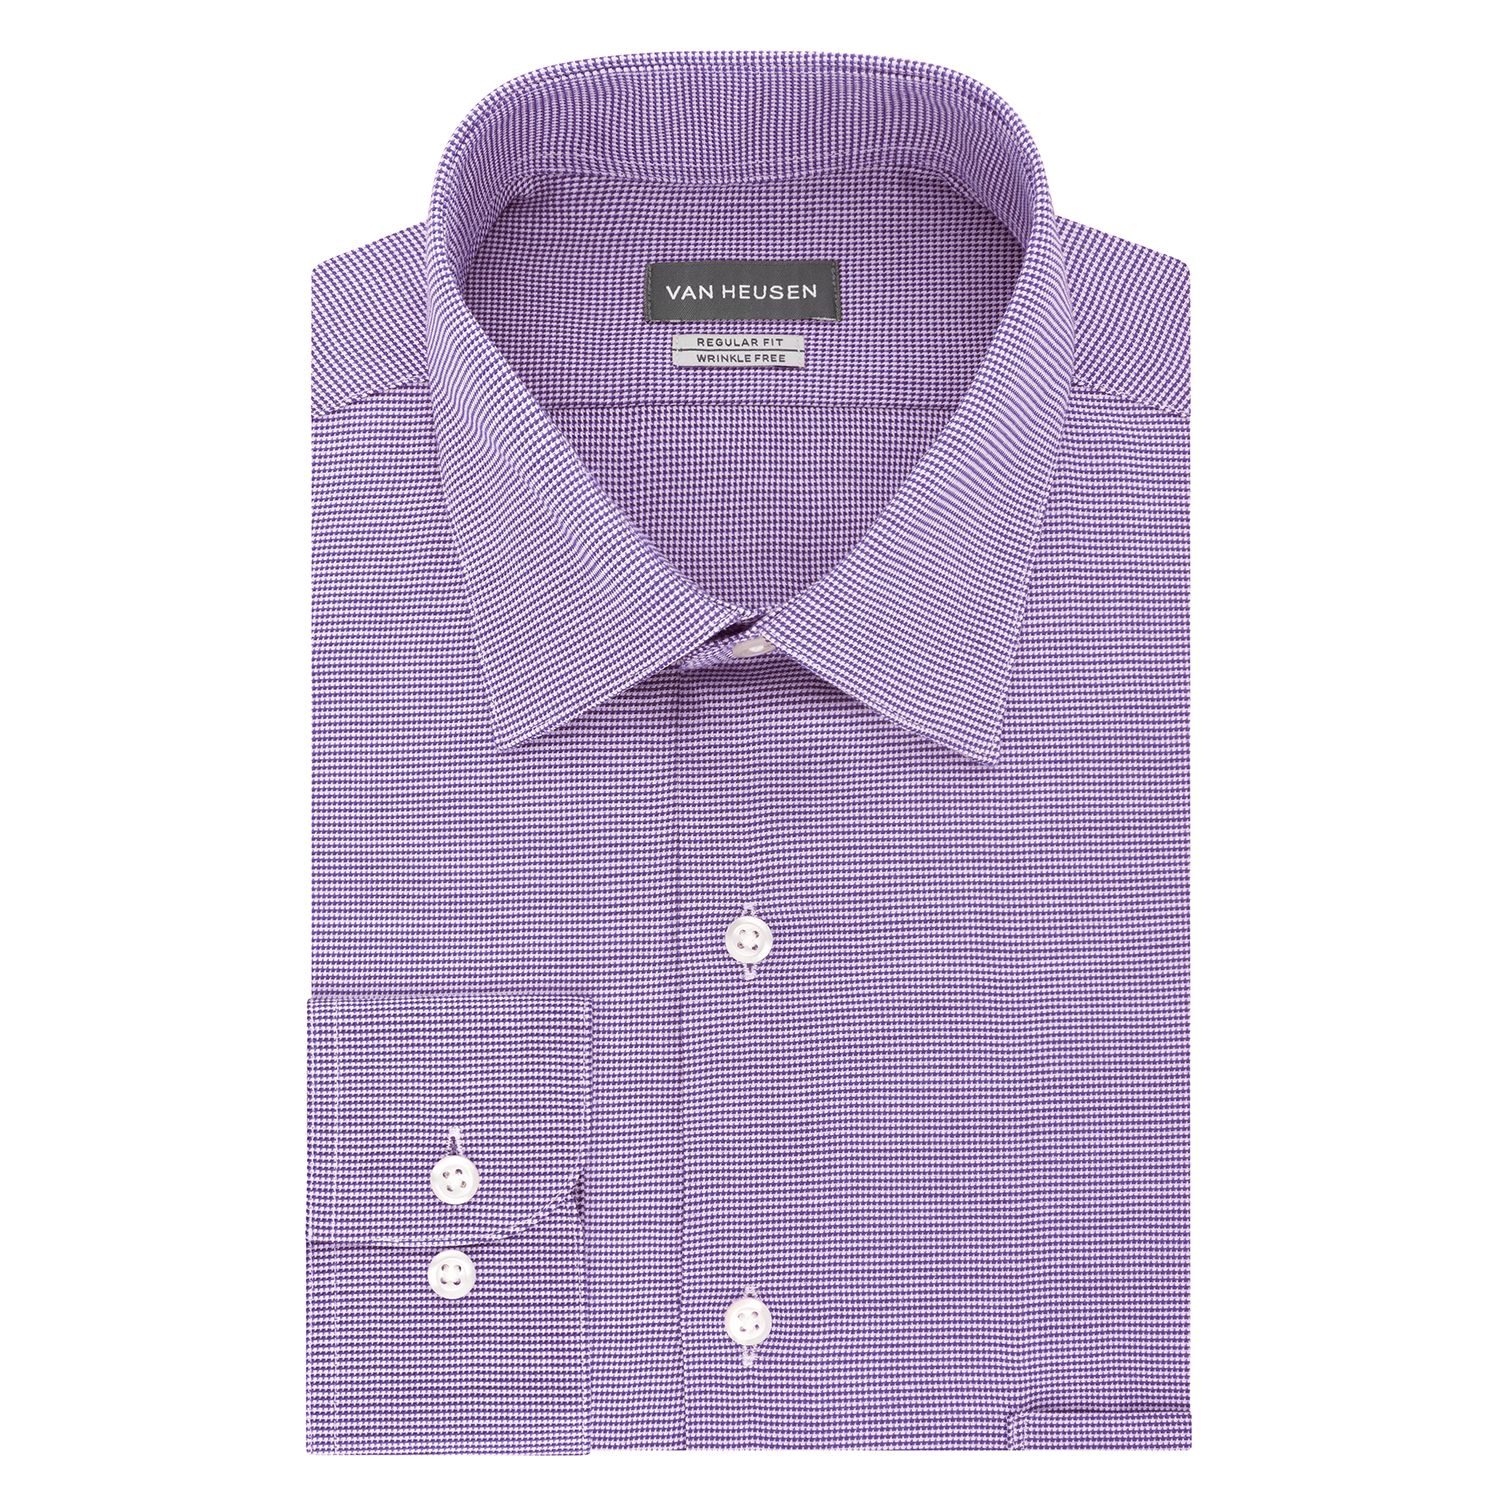 big and tall dress shirts for men